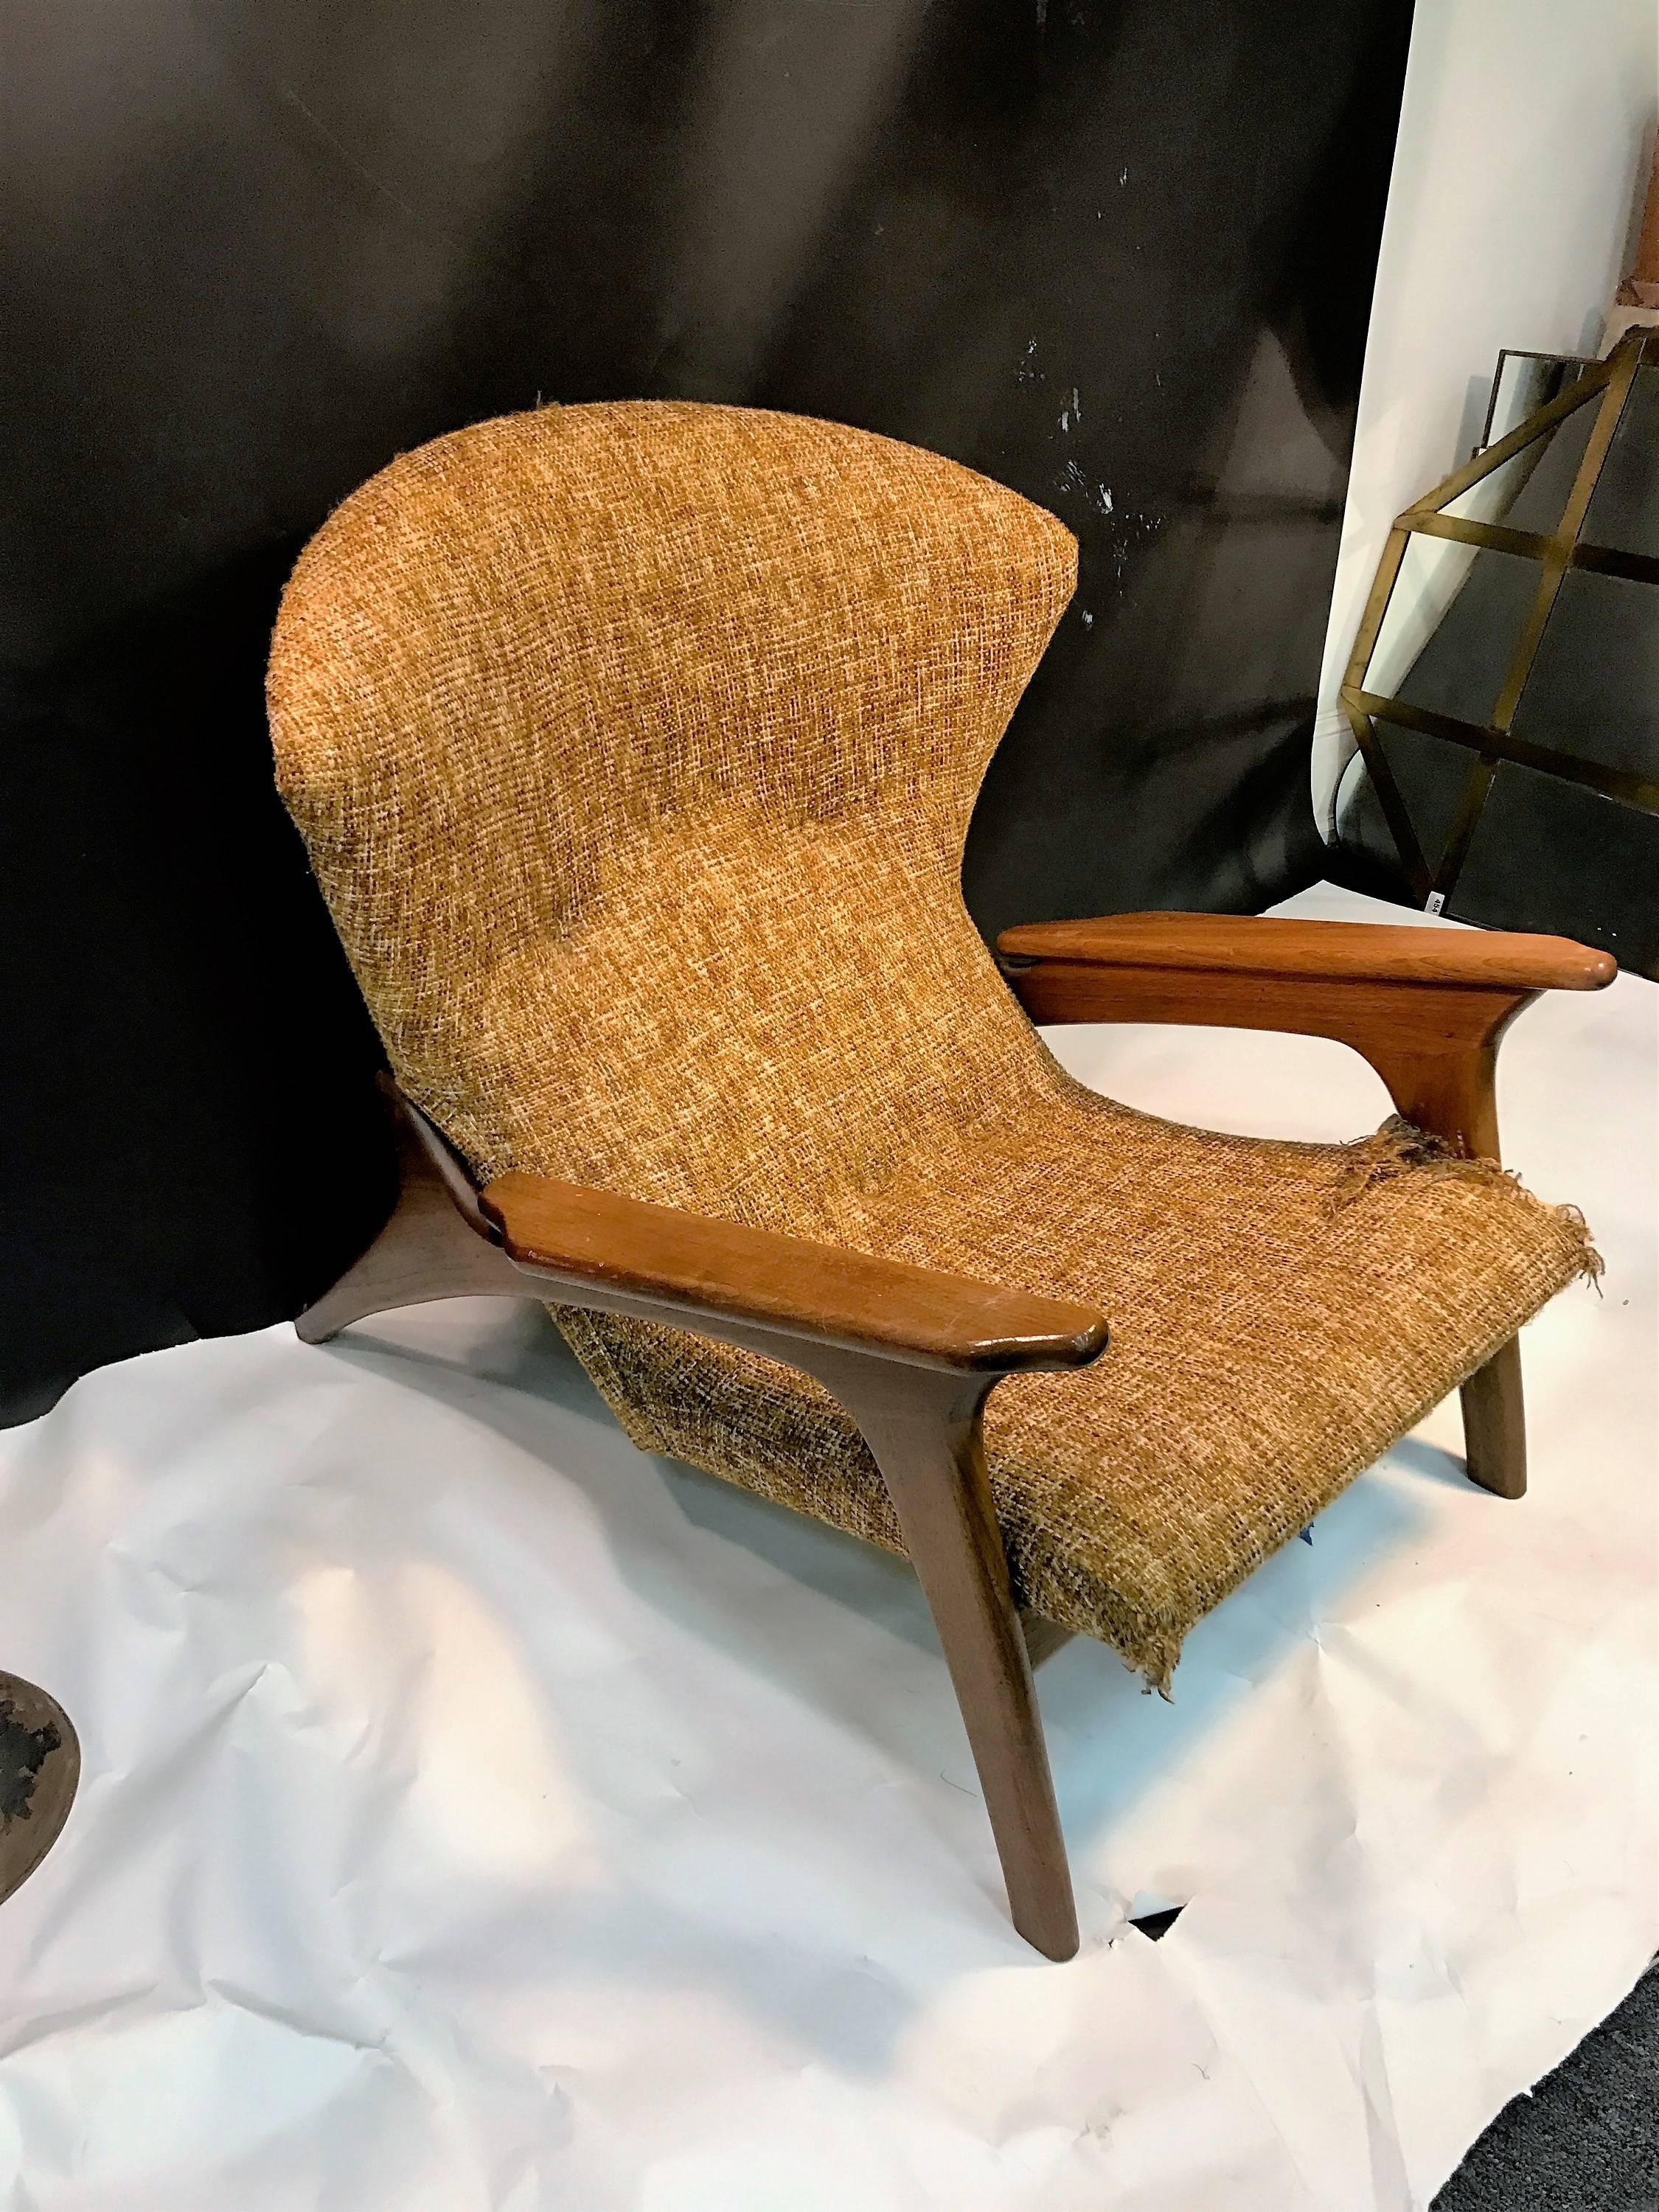 Angular Grasshopper Chair and Ottoman by Adrian Pearsall In Excellent Condition For Sale In Mount Penn, PA